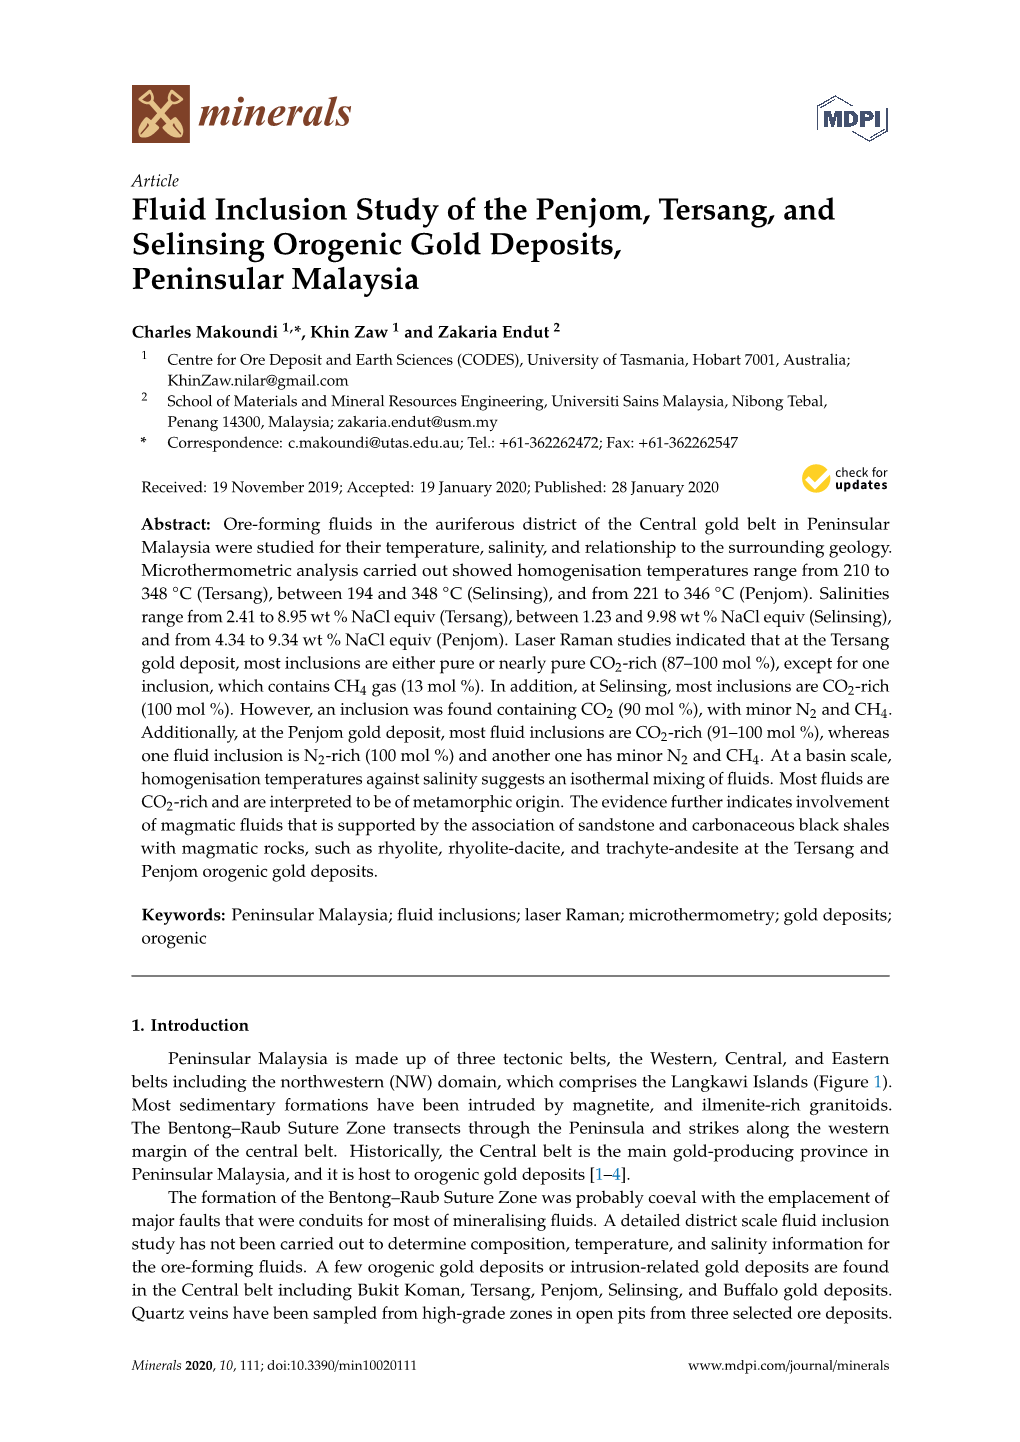 Fluid Inclusion Study of the Penjom, Tersang, and Selinsing Orogenic Gold Deposits, Peninsular Malaysia